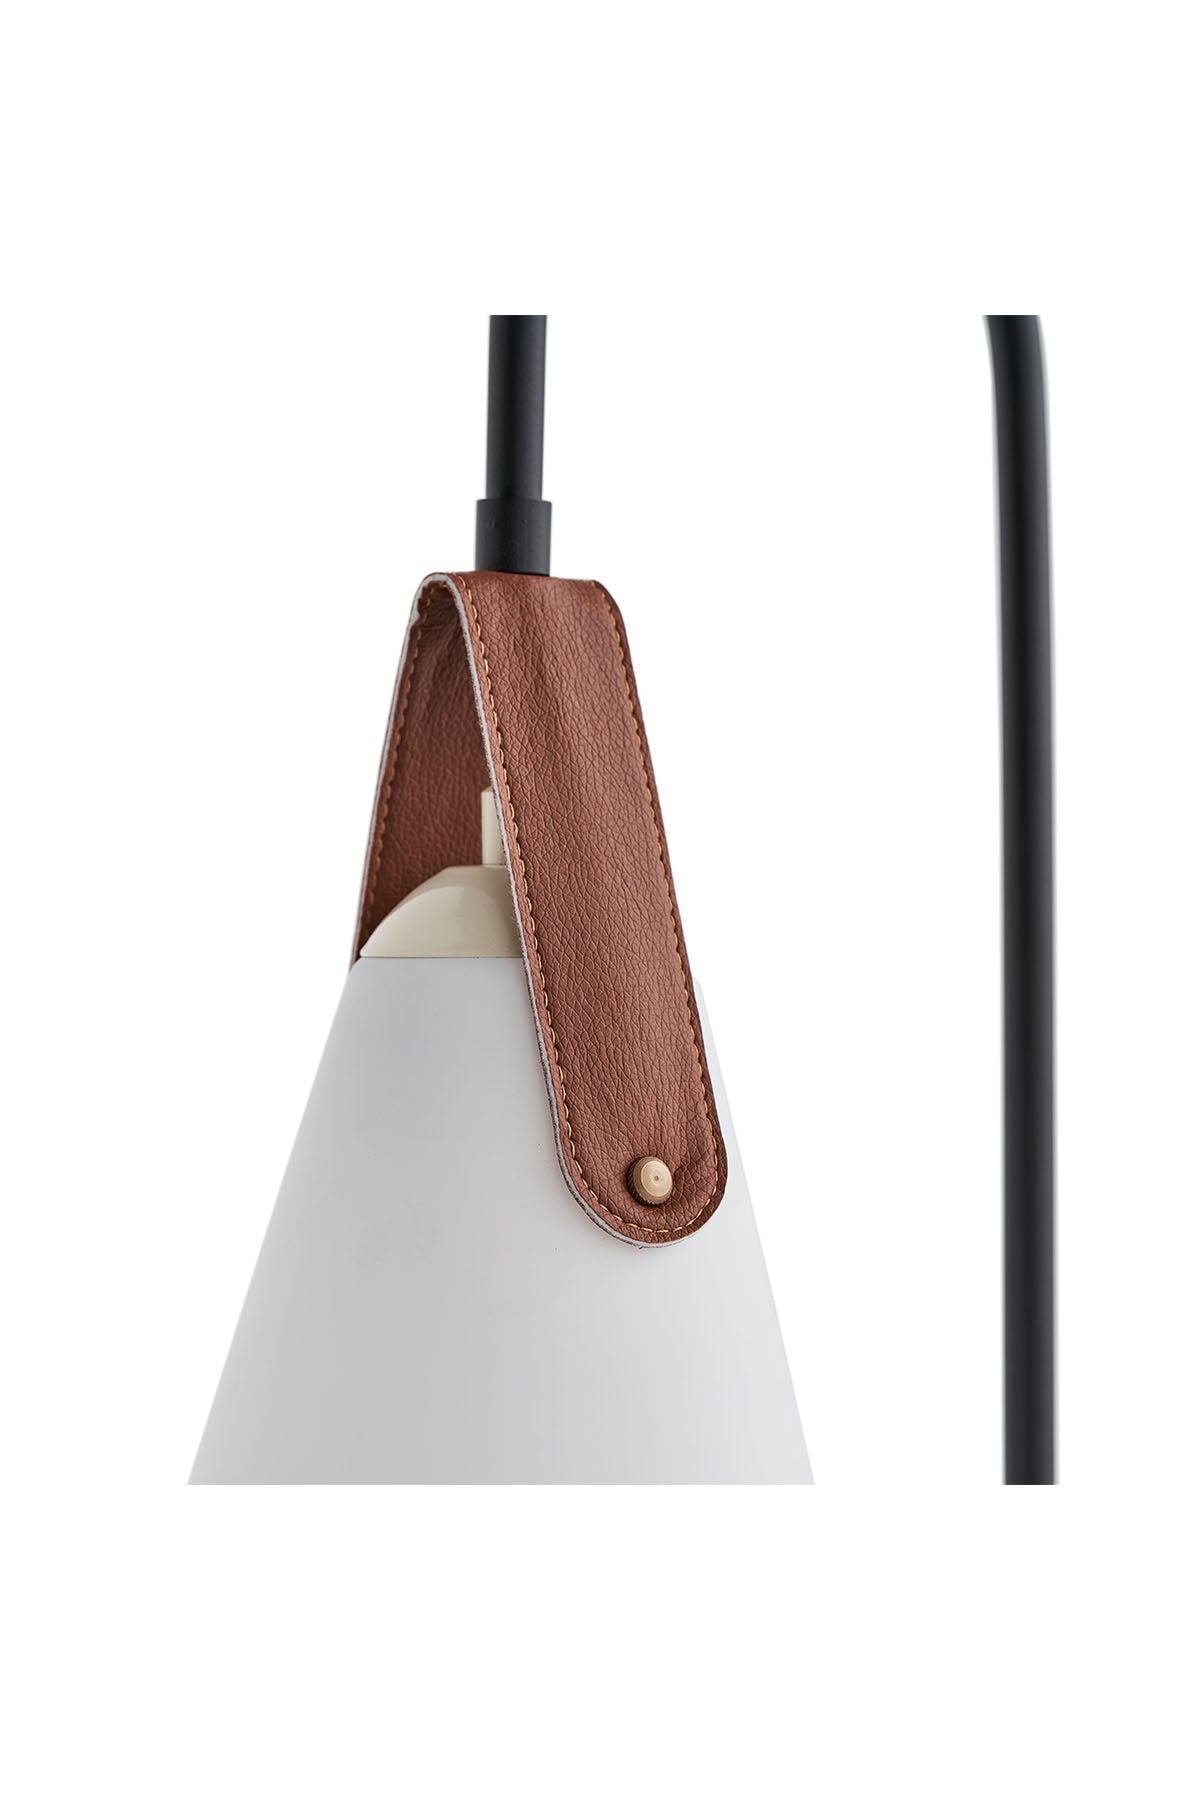 Leather Lampshade